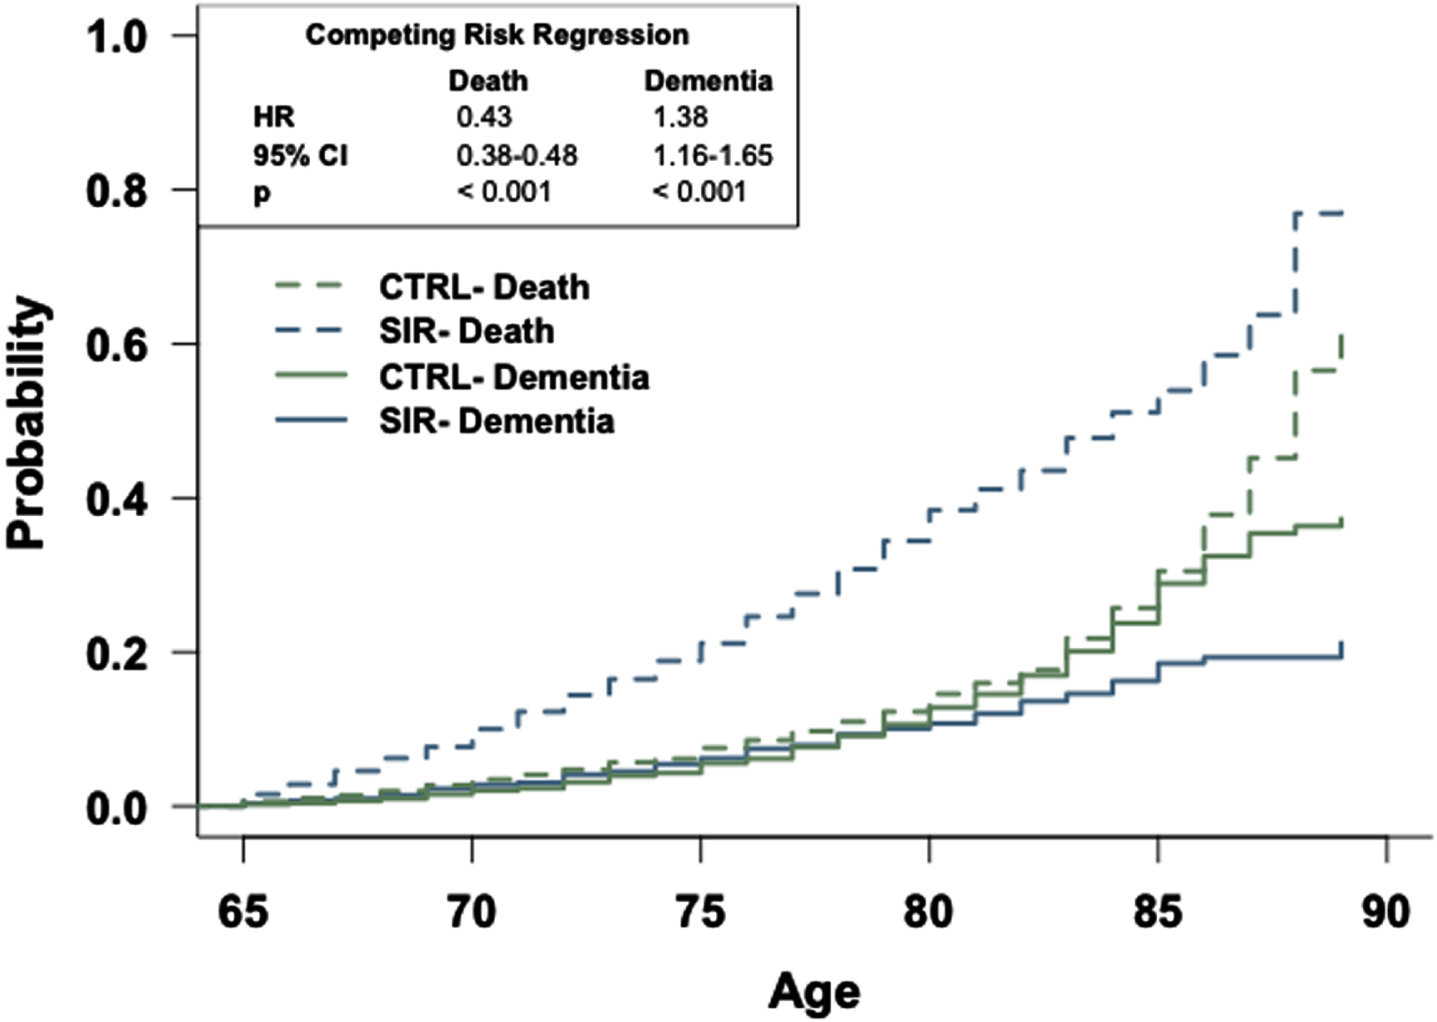 The general population has an increased risk of dementia relative to patients prescribed sirolimus. Competing risk regression analysis of dementia and death between patients prescribed sirolimus or in the general population-like control. Patients in the general population-like control have an increased risk of dementia but a decreased risk of death. n = 2,928 patients/cohort. CRR, competing risk regression; HR, hazard ratio; CI, confidence interval.